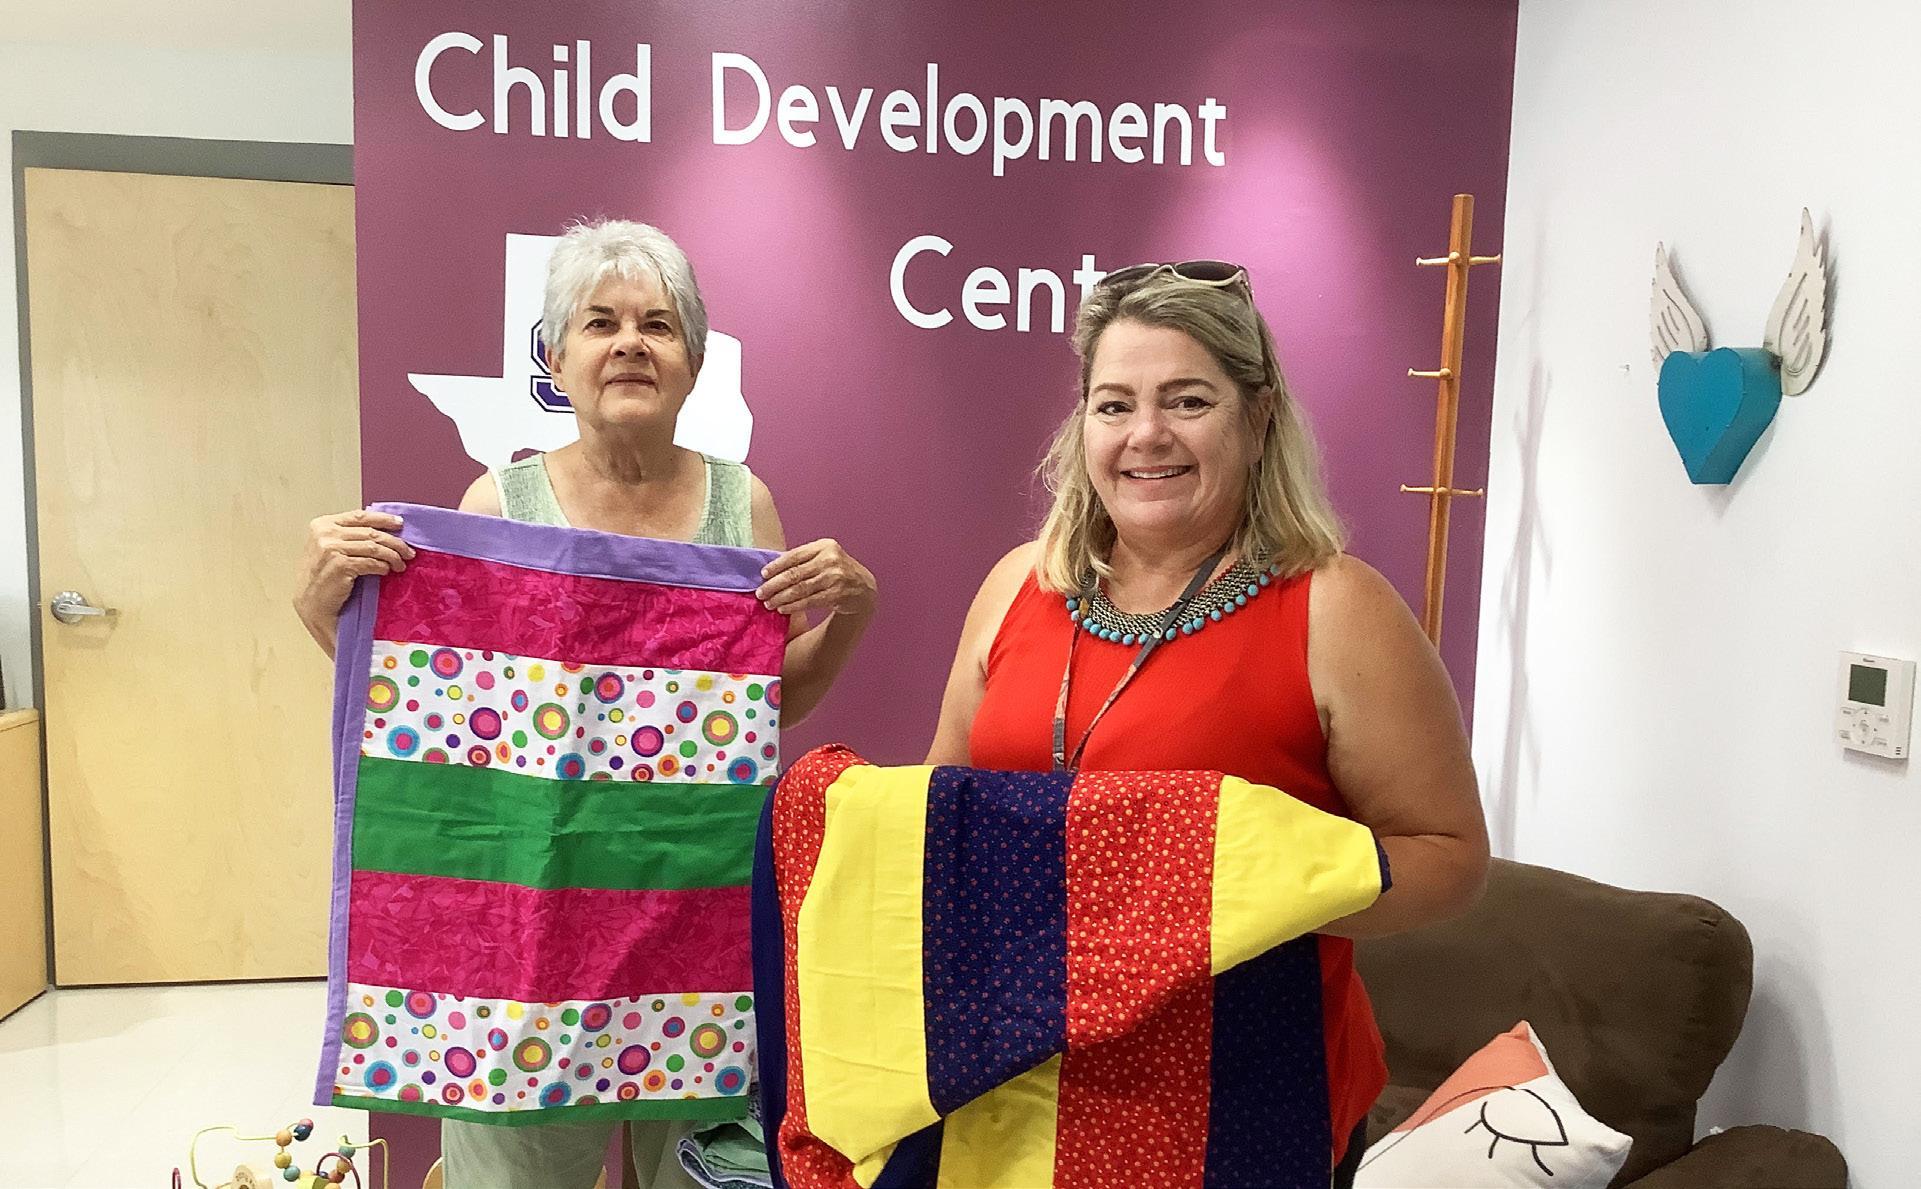 Local sewing guild presents quilted gifts